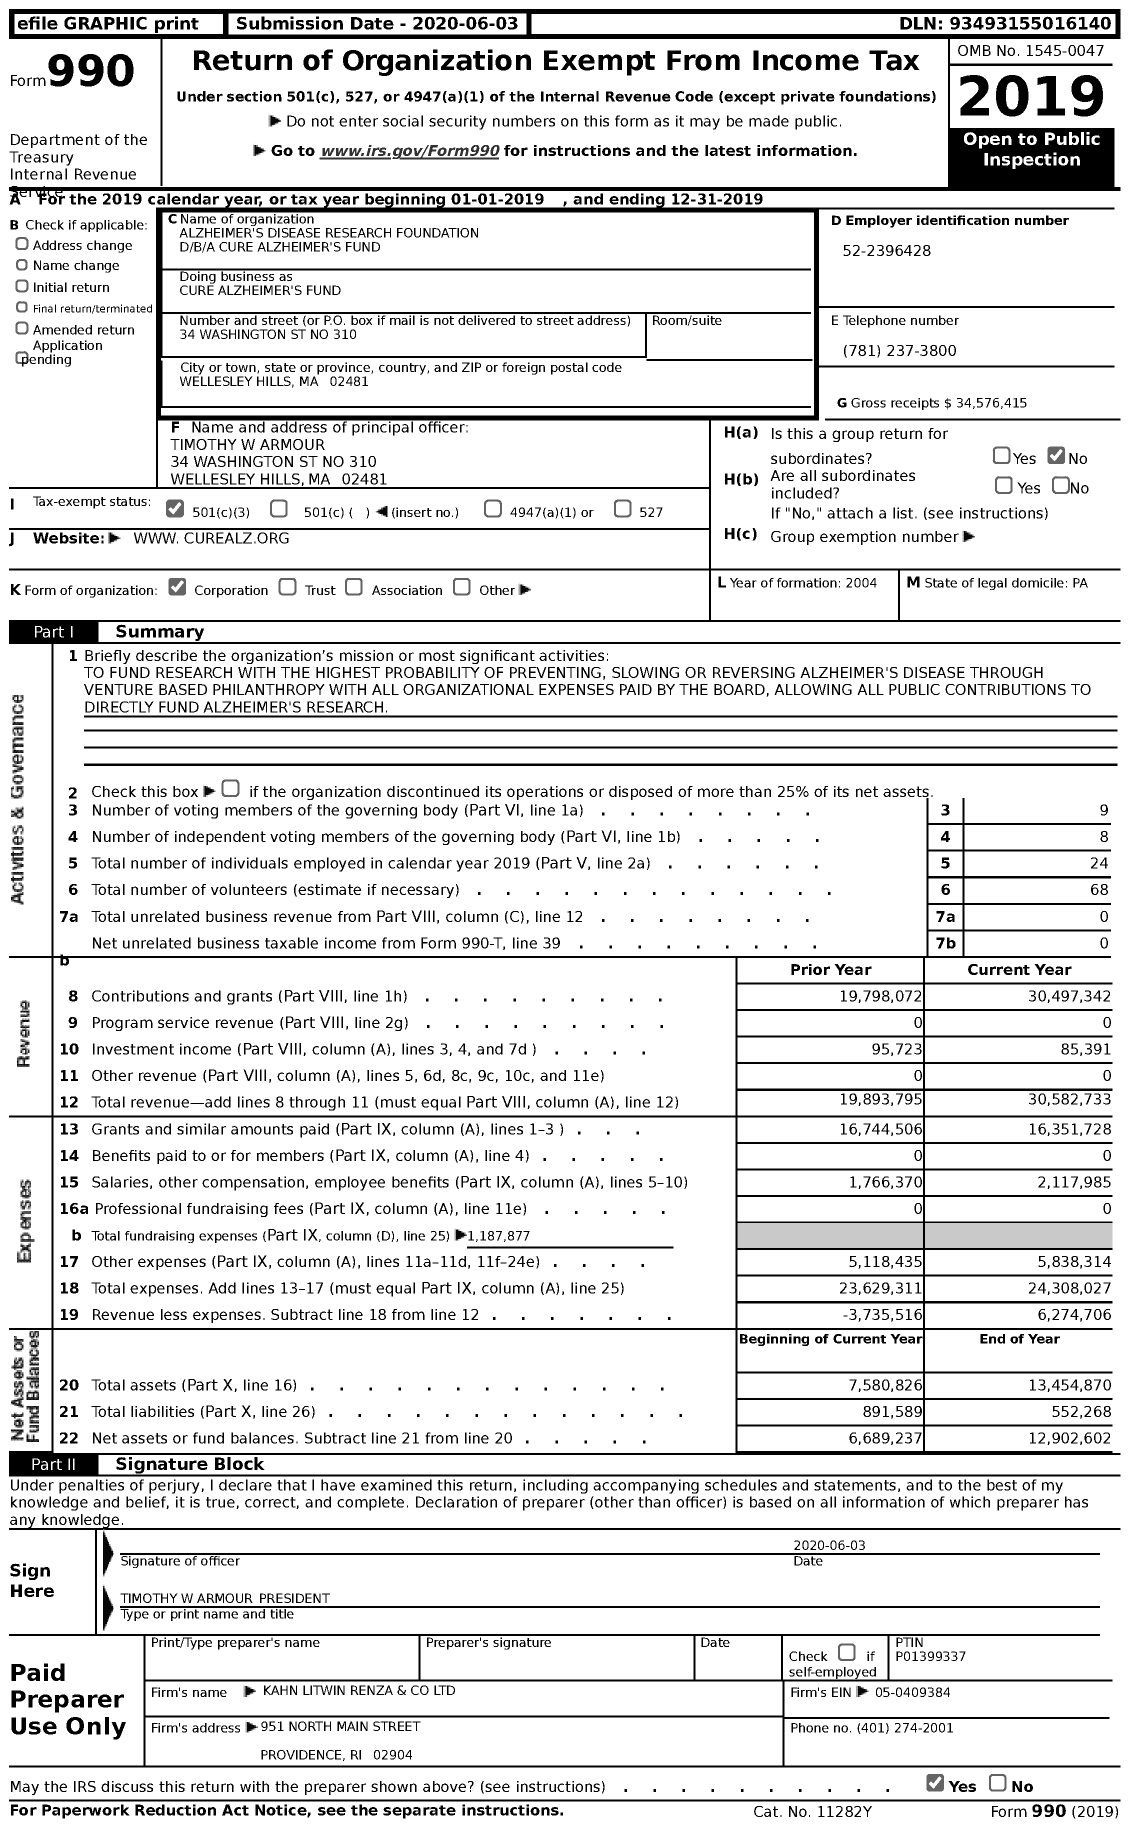 Image of first page of 2019 Form 990 for Cure Alzheimer's Fund (CAF)